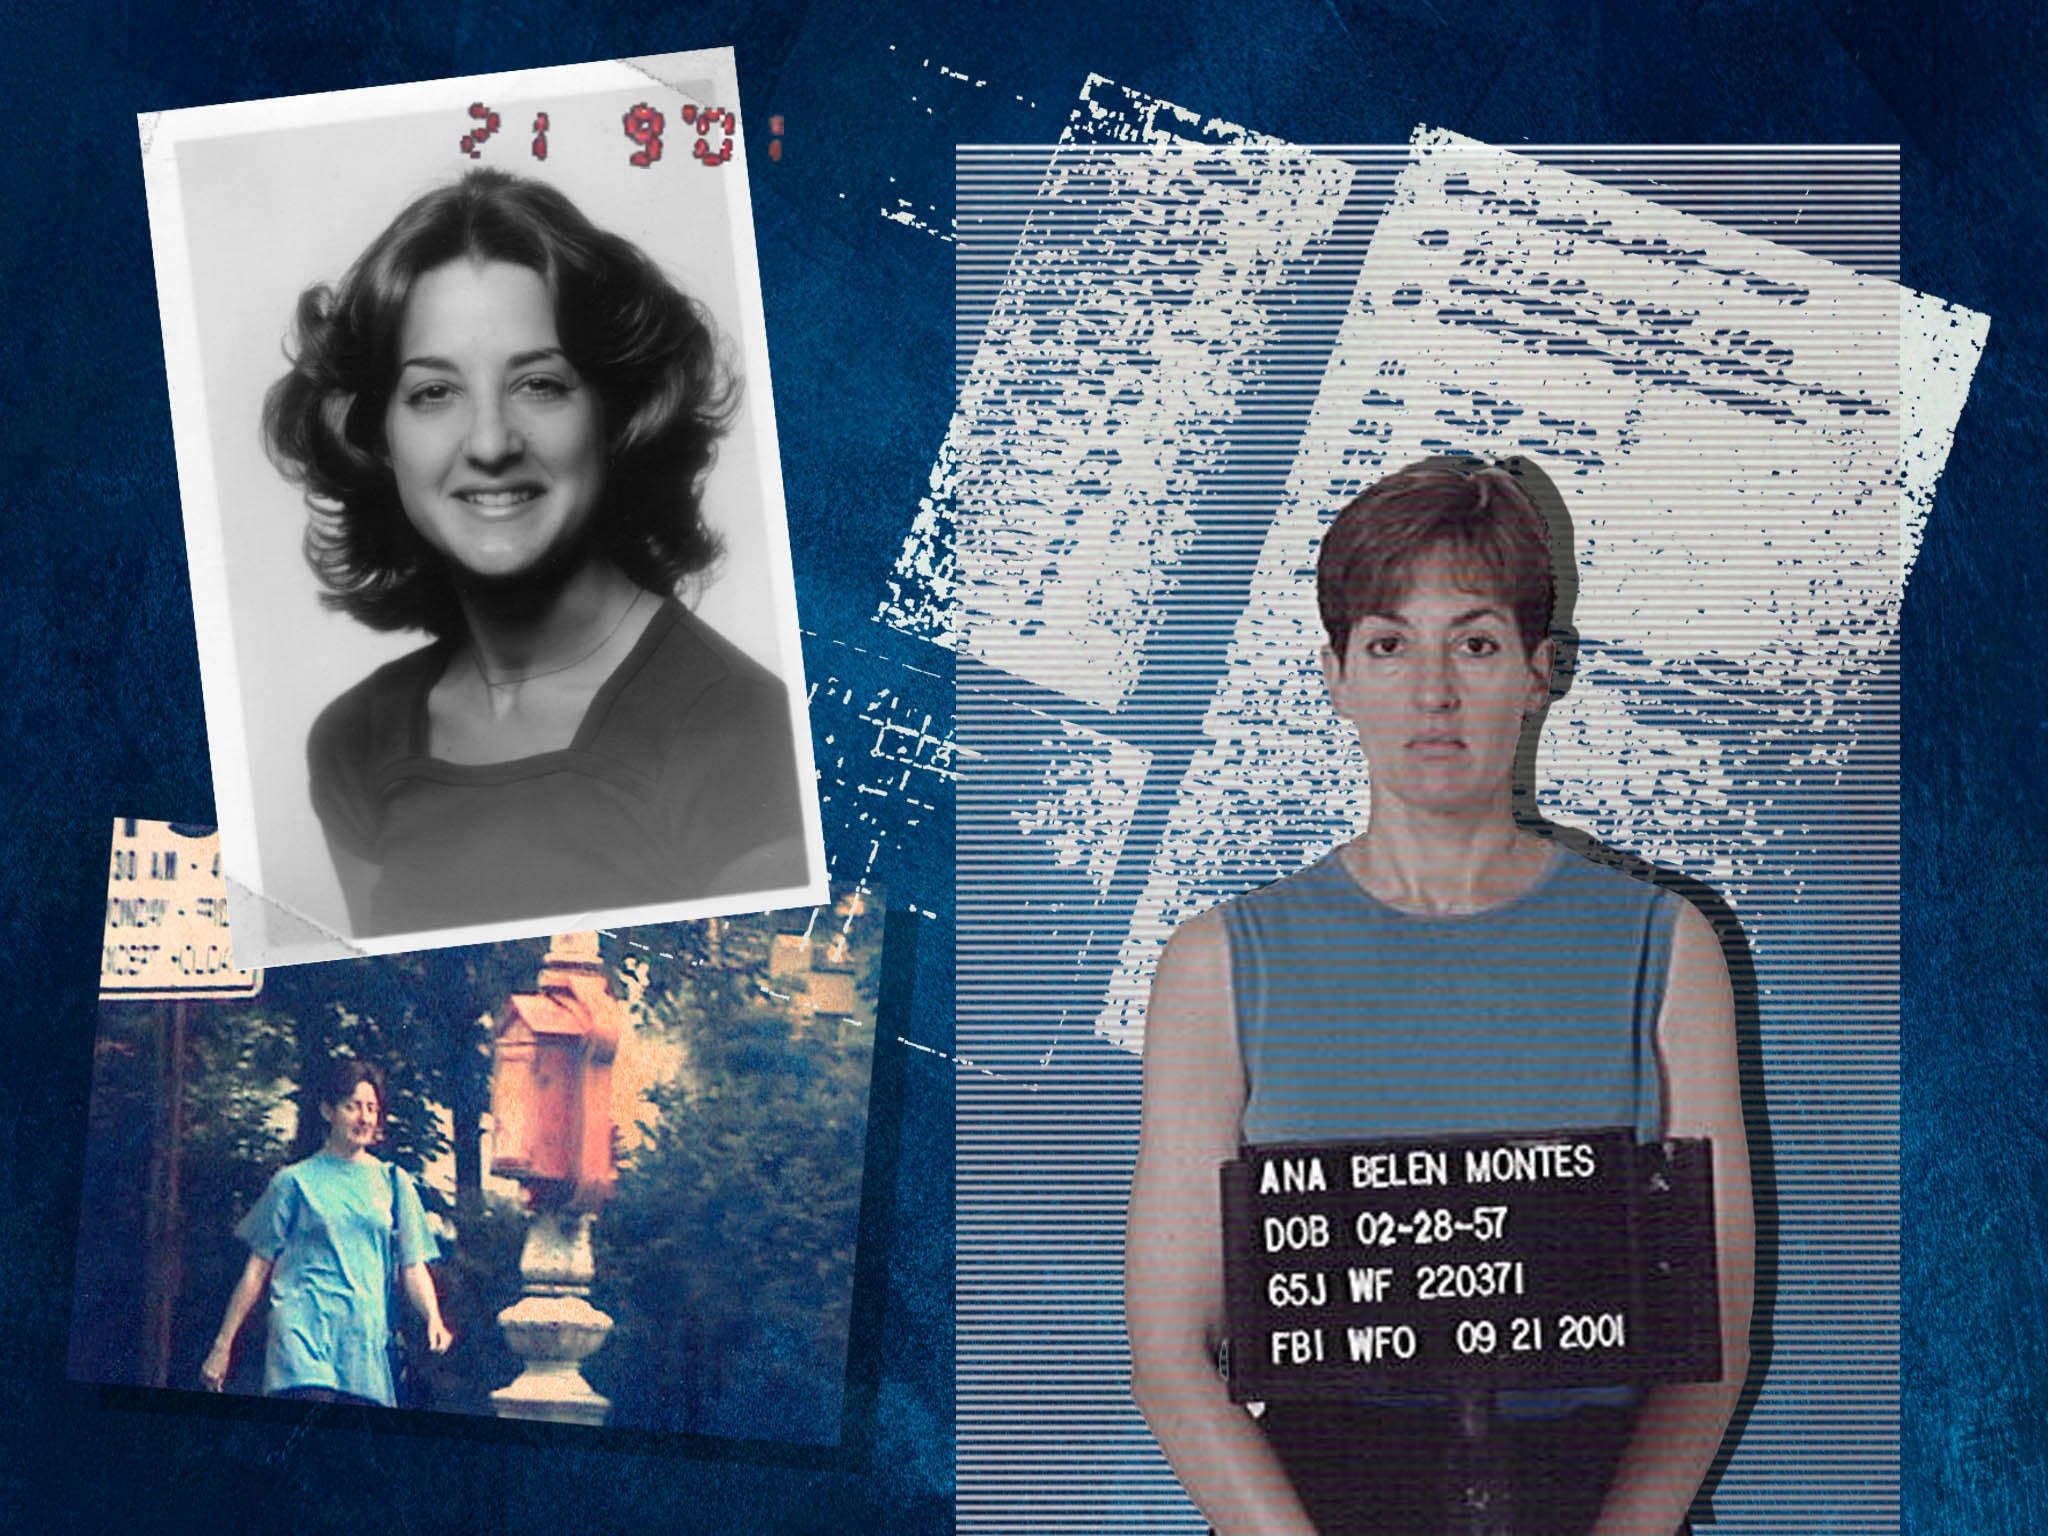 She spied for Cuba for years from inside the US government pic